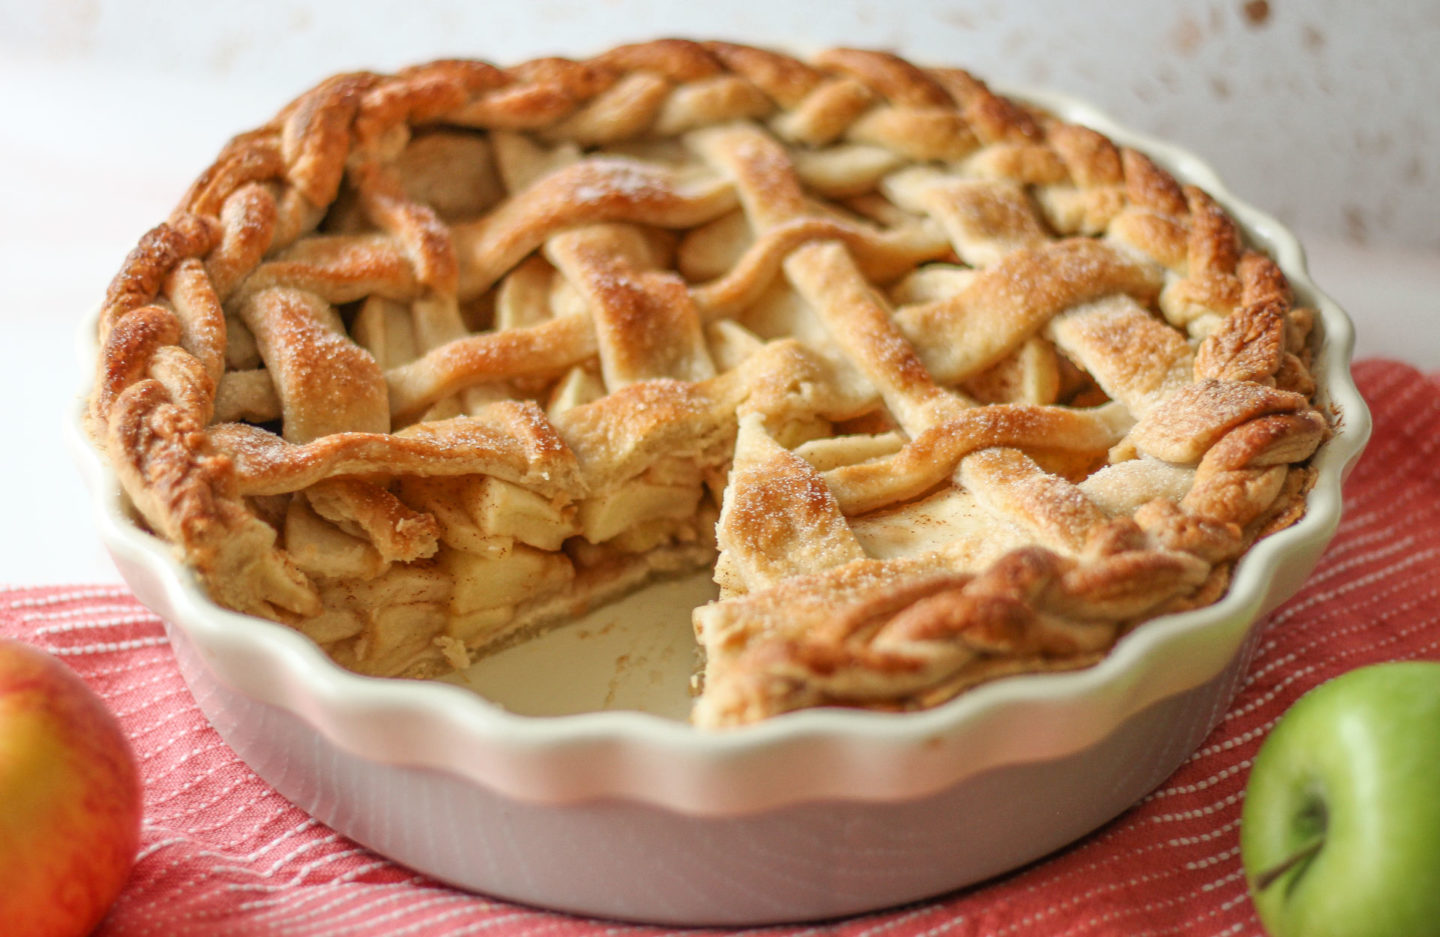 whole lattice apple pie with slice taken from it, showing the filling inside